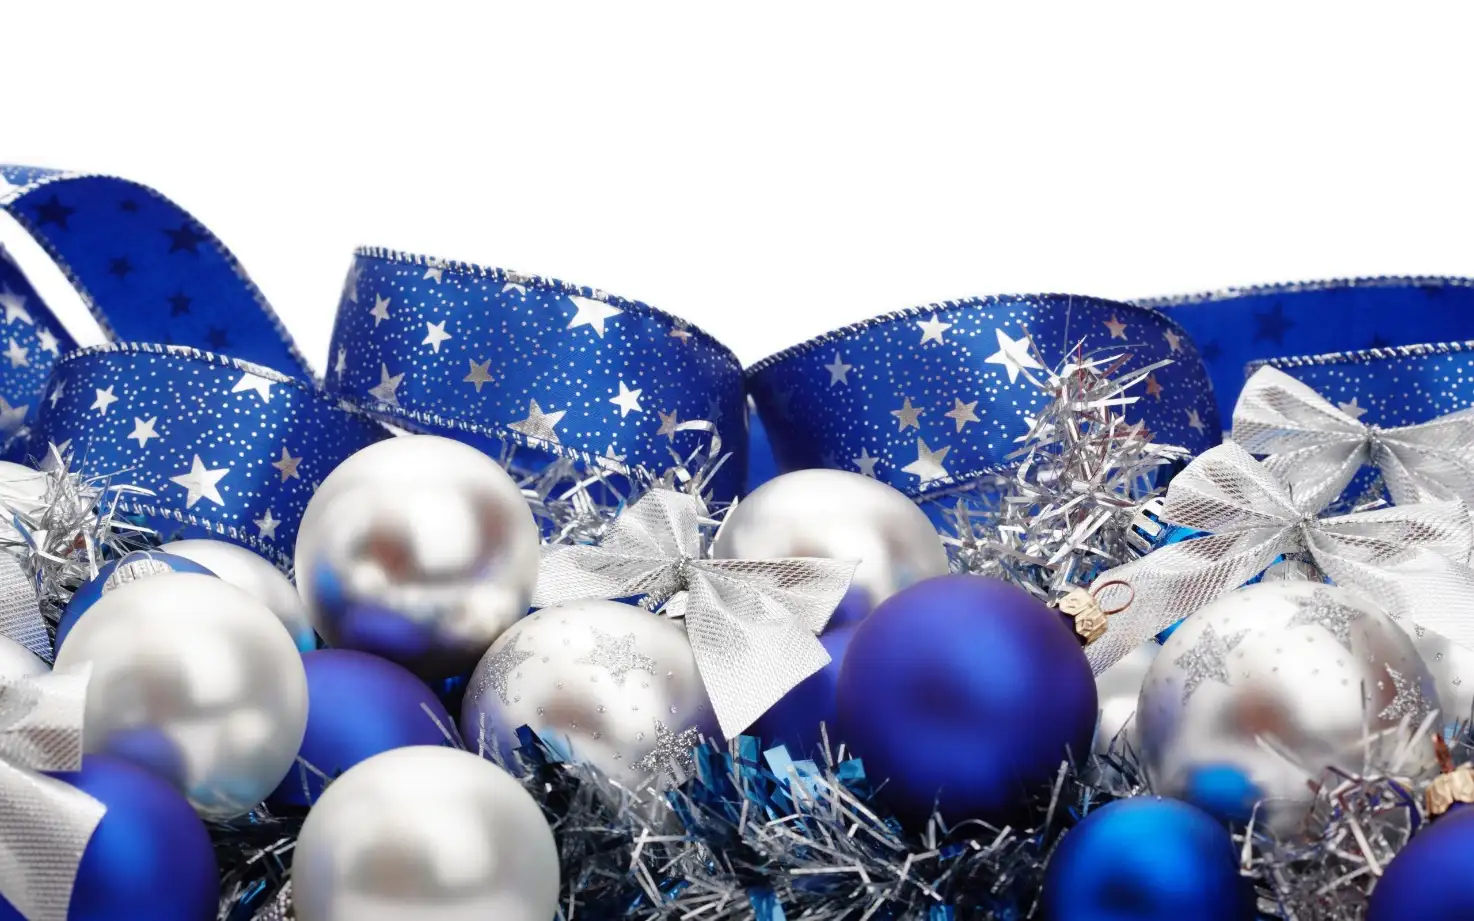 White/silver and blue Christmas decorations